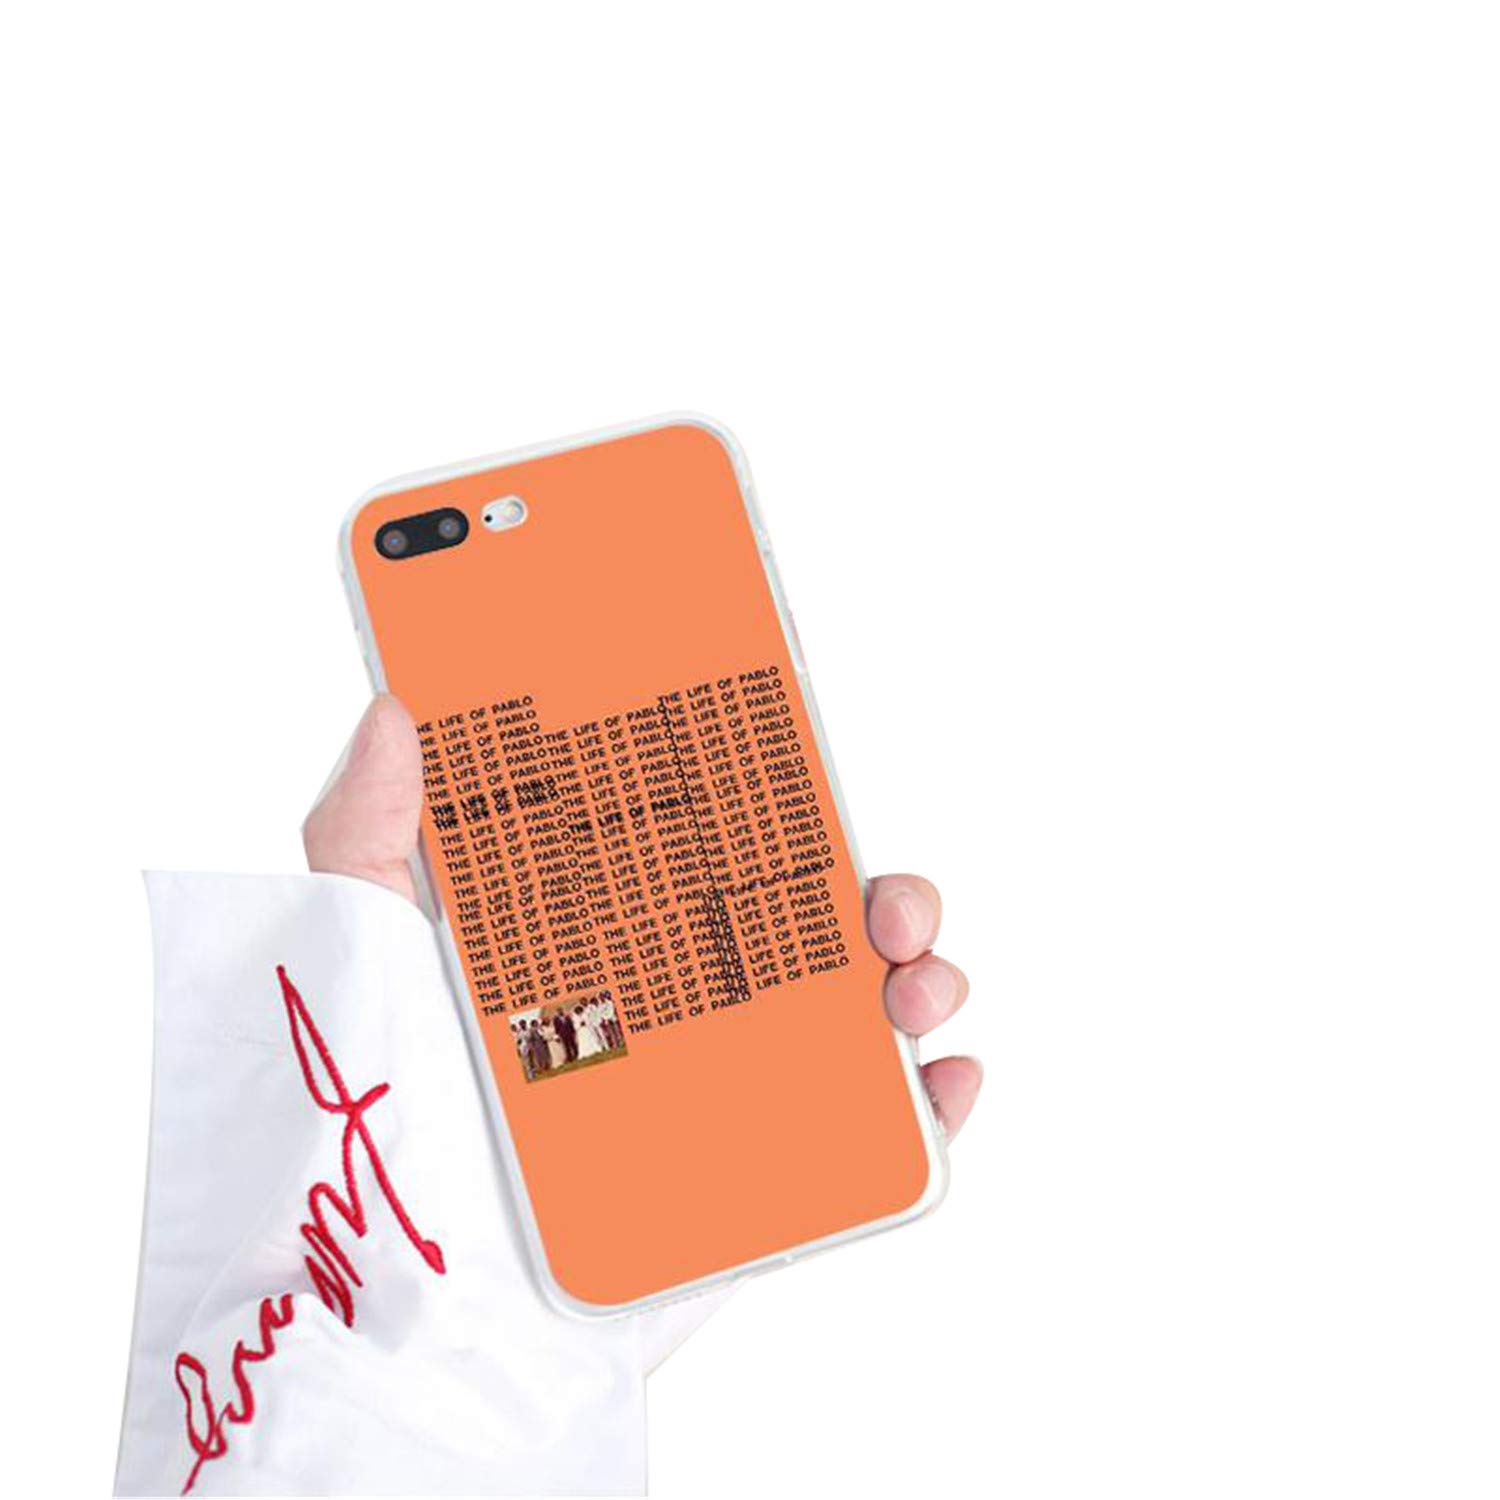 Kanye West Rapper Soft Silicone Phone Case For Iphone - Iphone 6s Plus - HD Wallpaper 